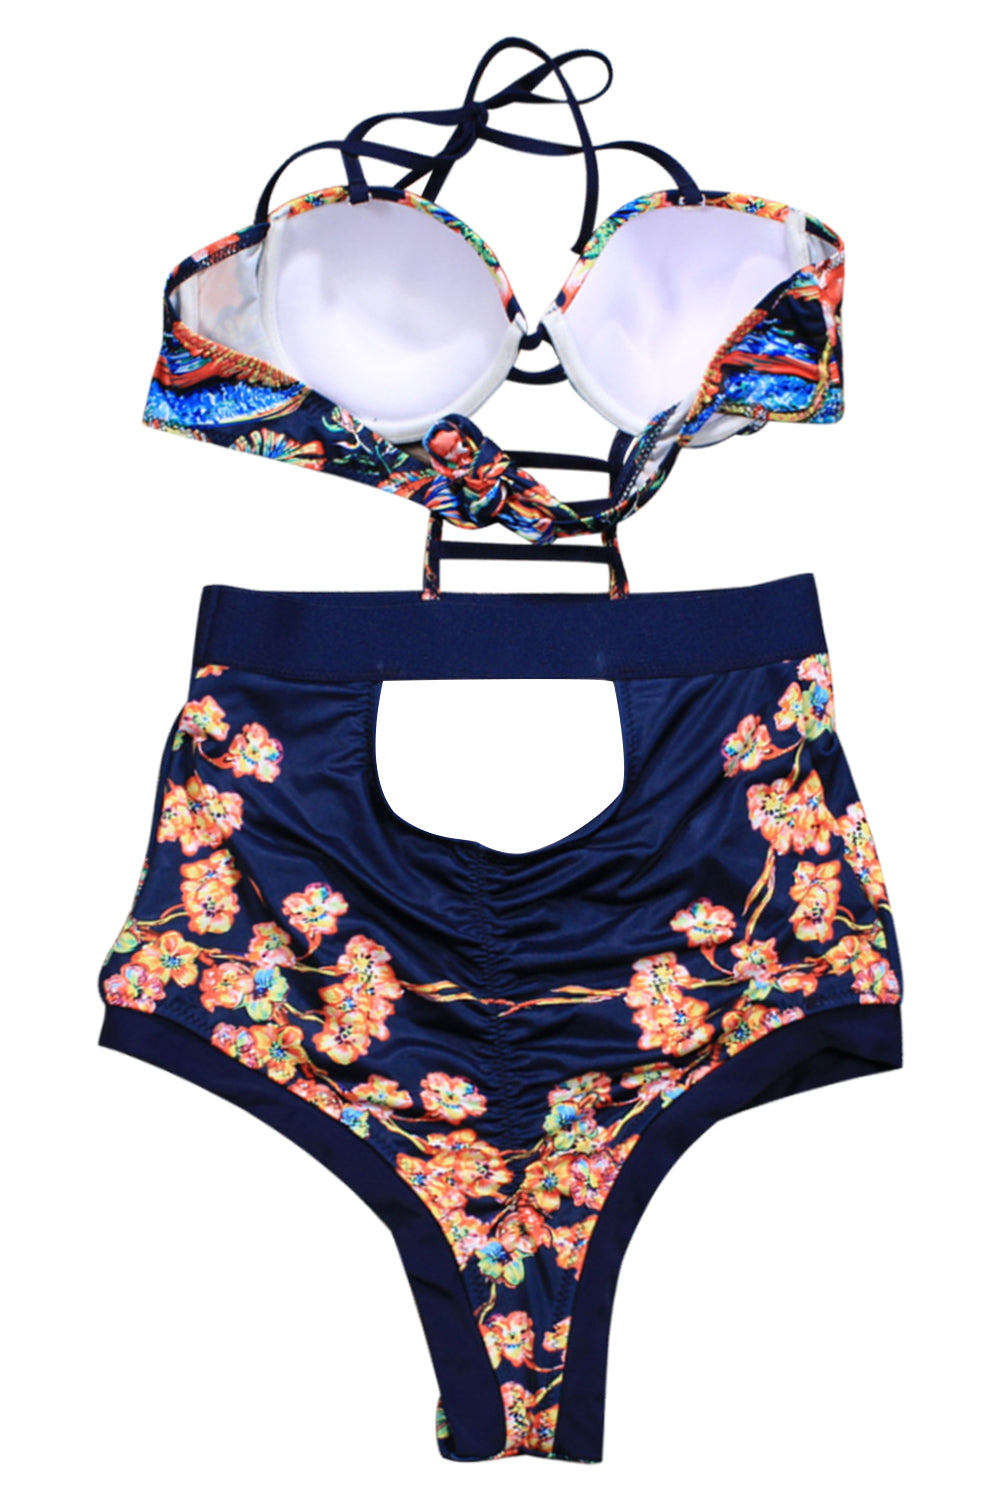 Iyasson Navy Blue Floral Print High-waisted One-piece Swimsuit